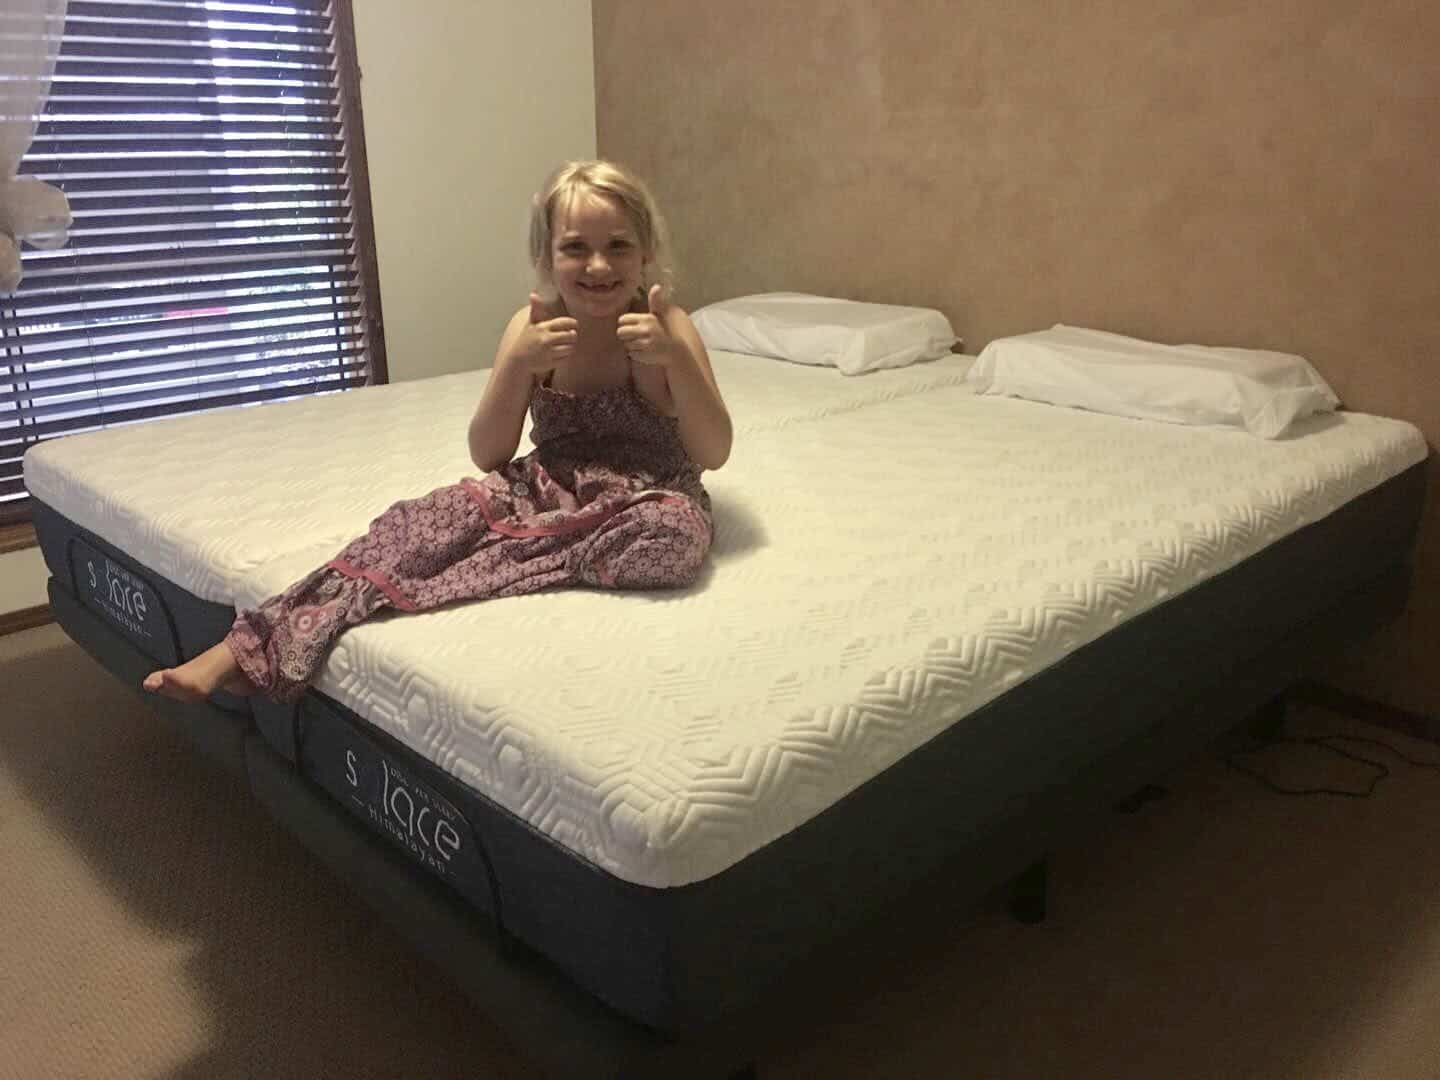 Solace Sleep adjustable bed review with little girl thumbs up